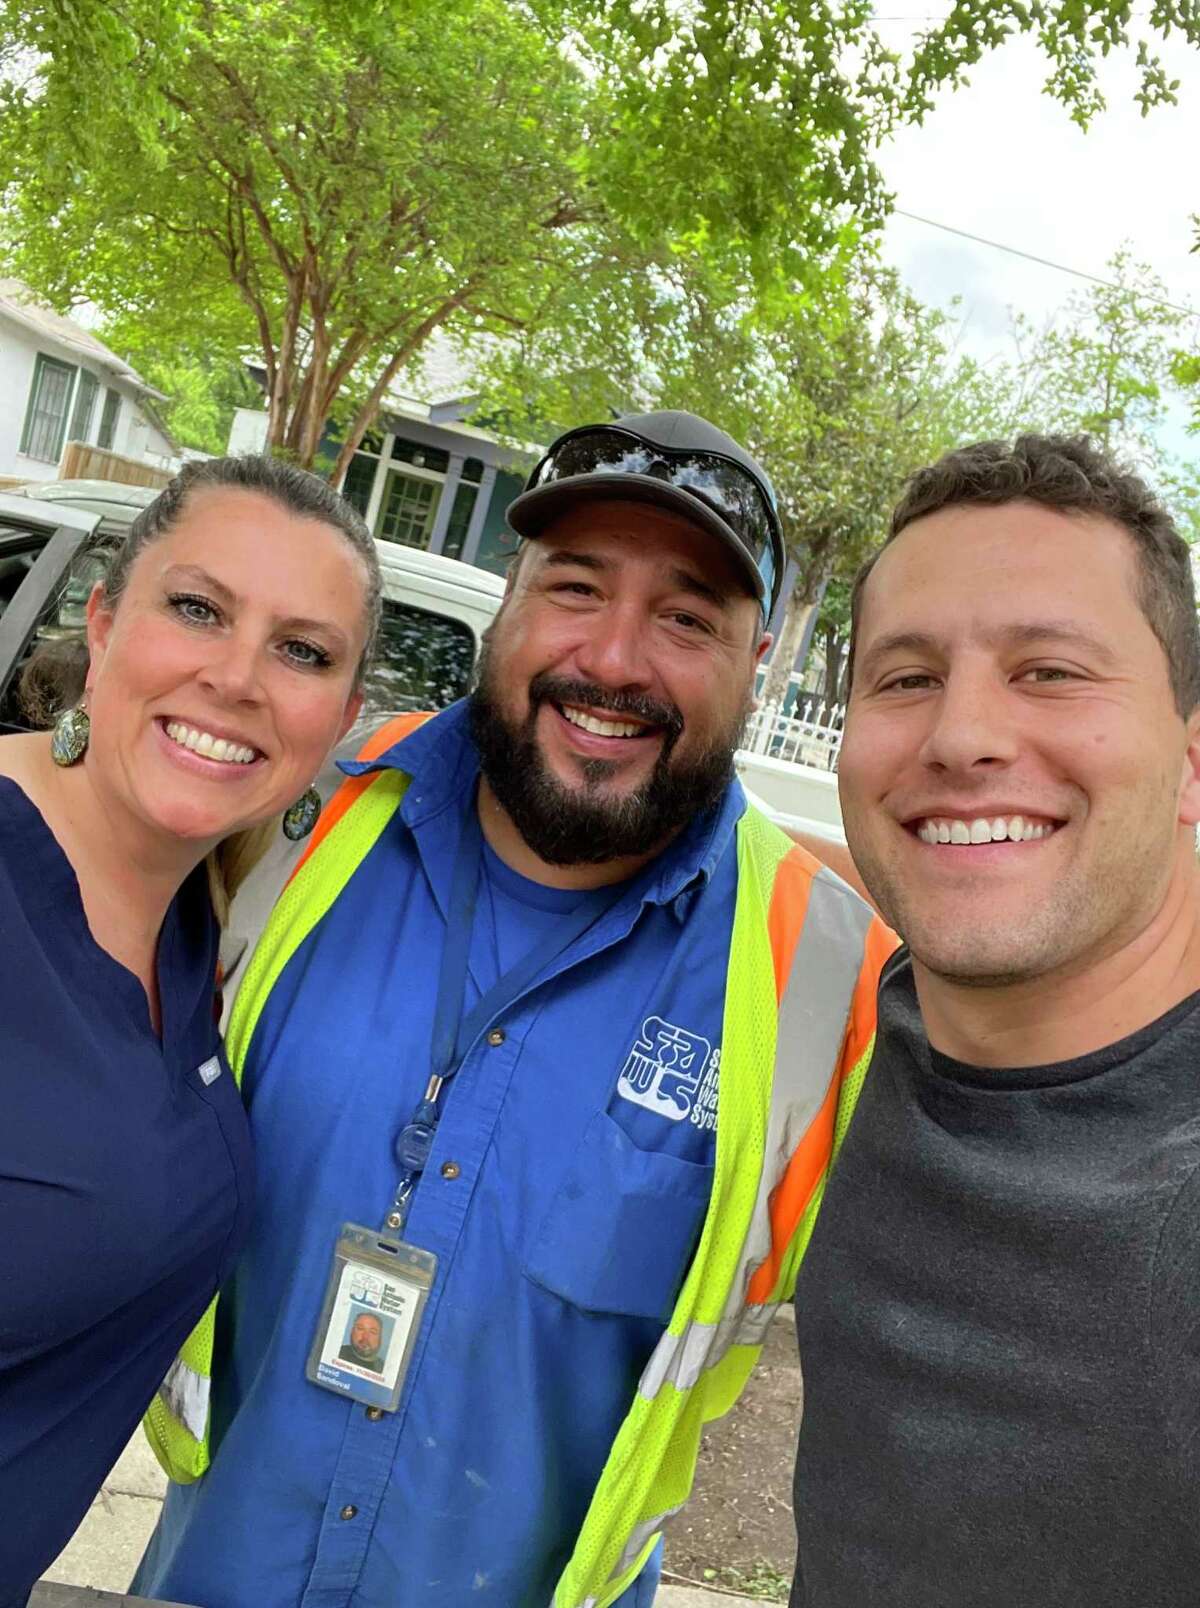 When a water main break was repaired and water restored, midwife Naomi Thomas, from left, SAWS foreman David Sandoval, and Evan Morris, posed for a selfie. A few hours later, Morris' wife, Courtney, safely delivered baby Stella in a water birth.